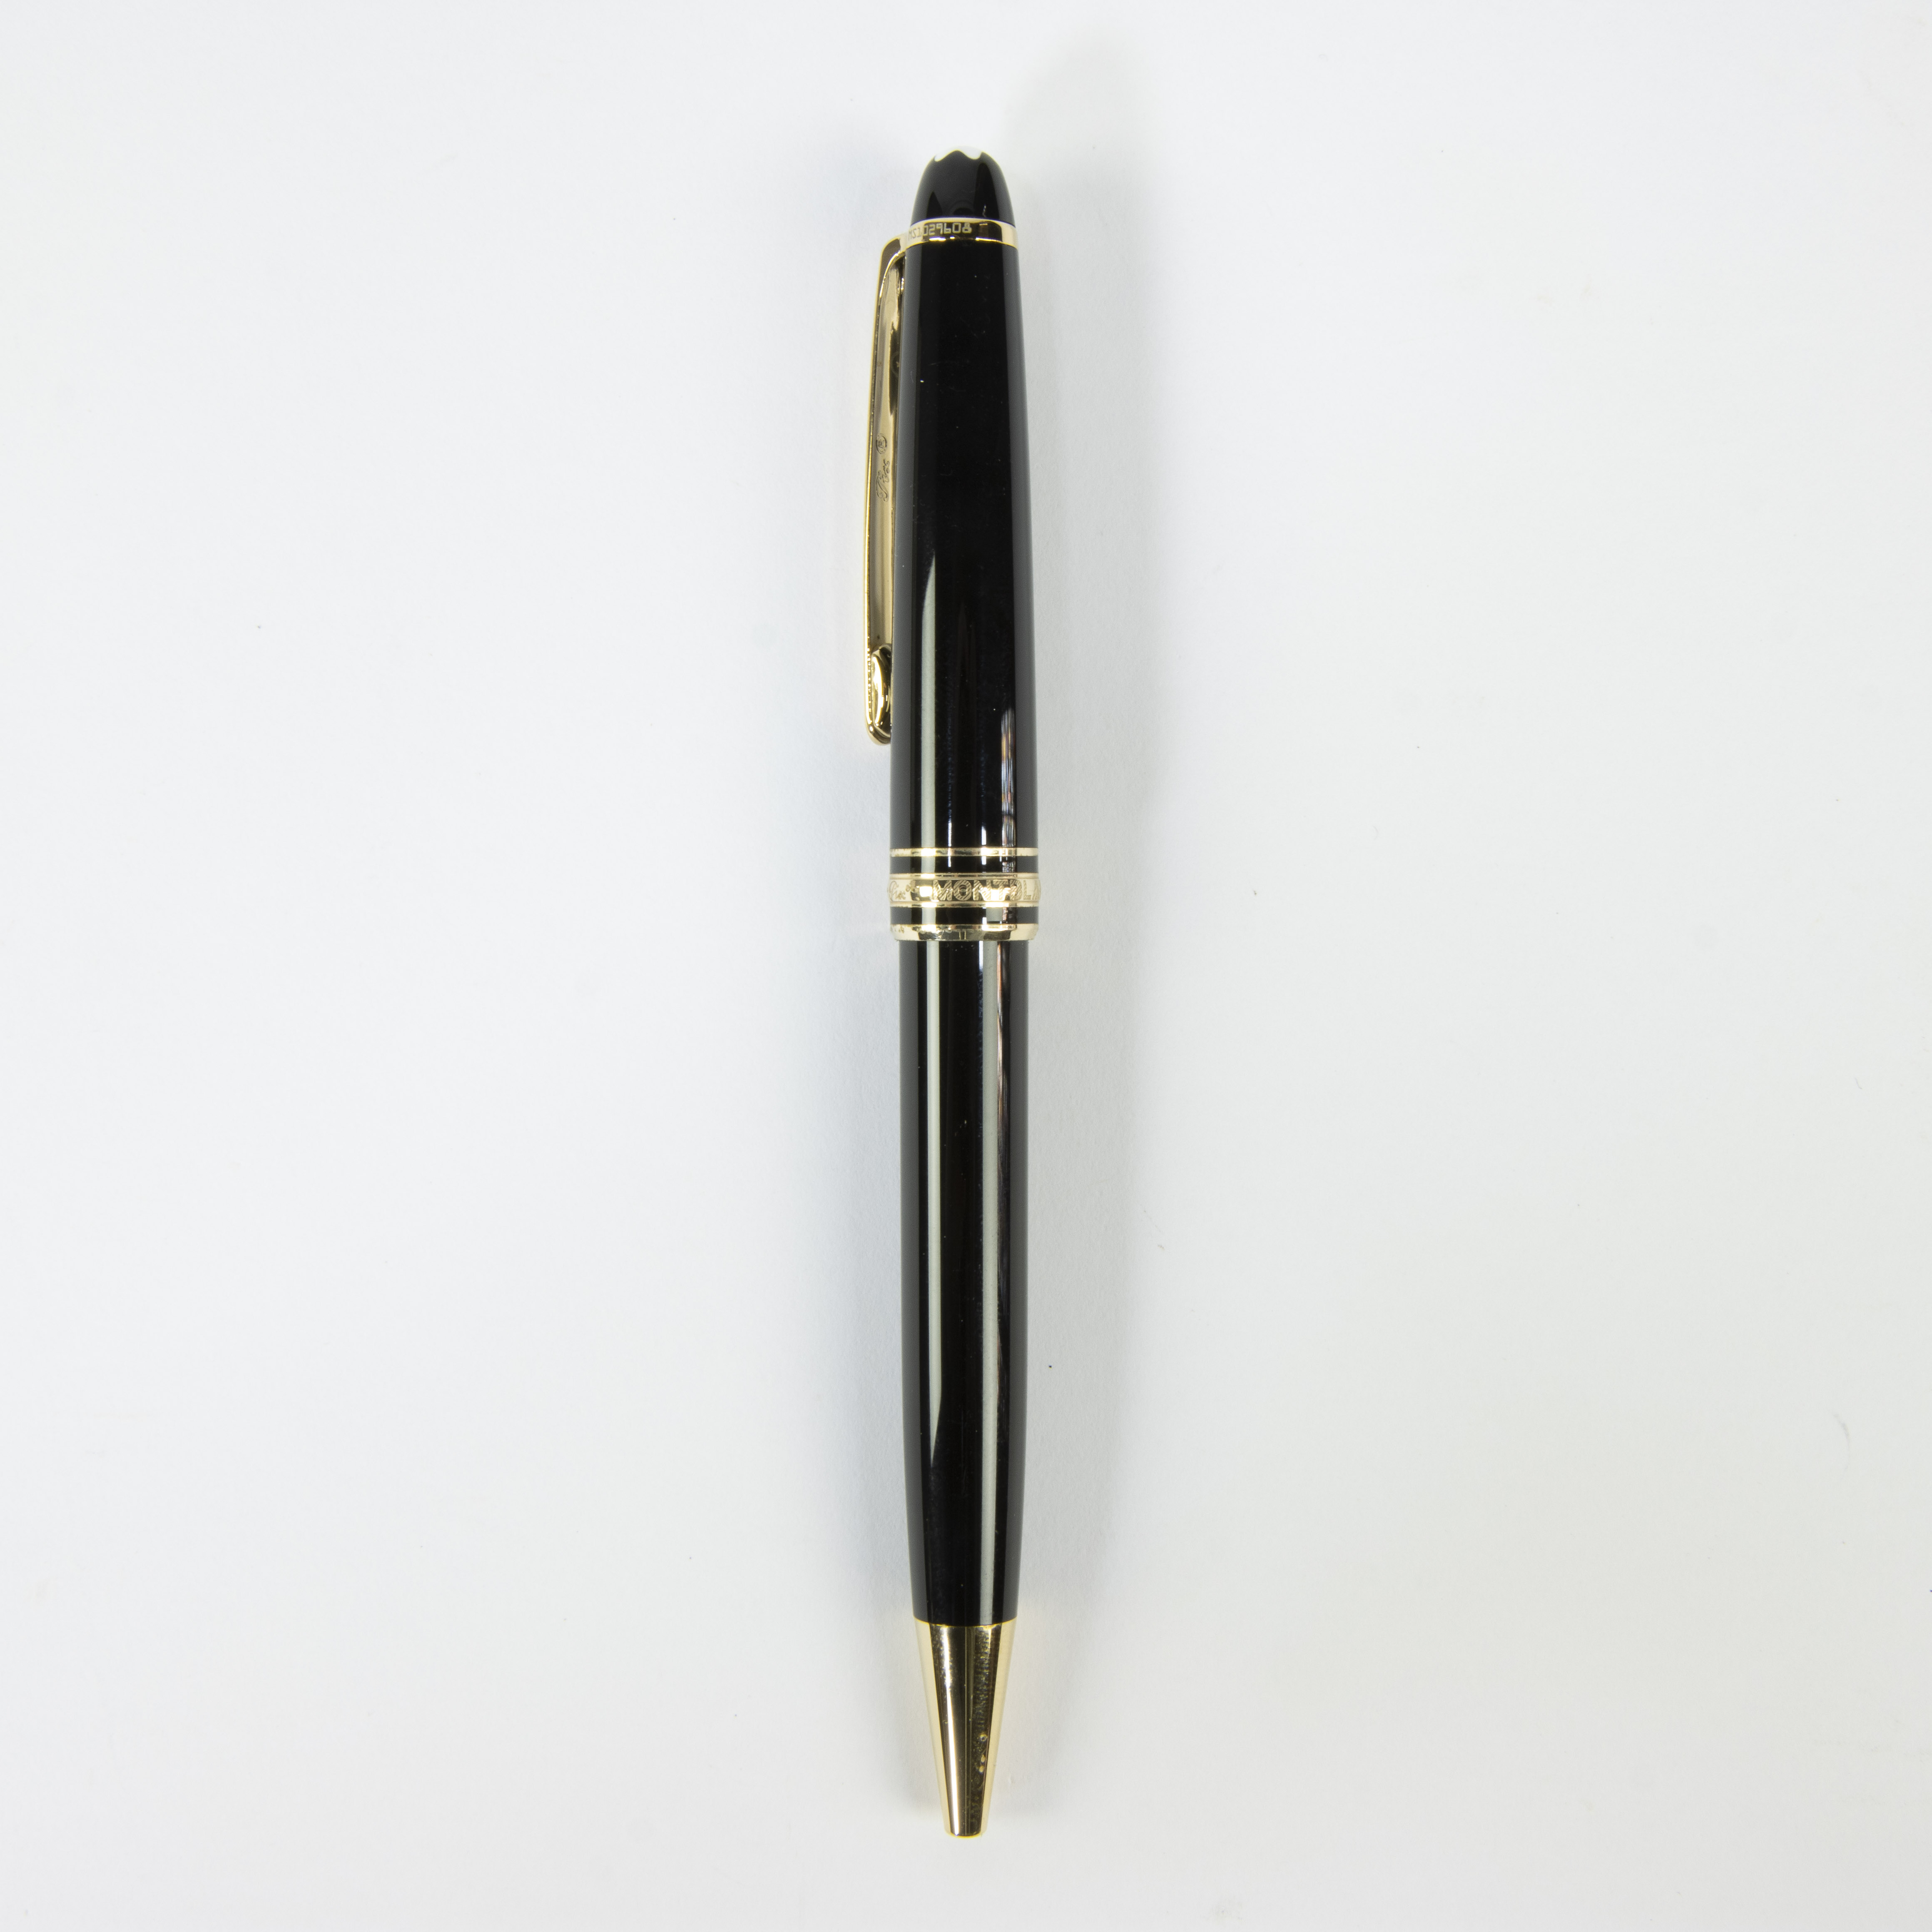 Ballpoint pen Meisterstuck from Montblanc in black resin with gold coloured details and the iconic M - Image 2 of 2